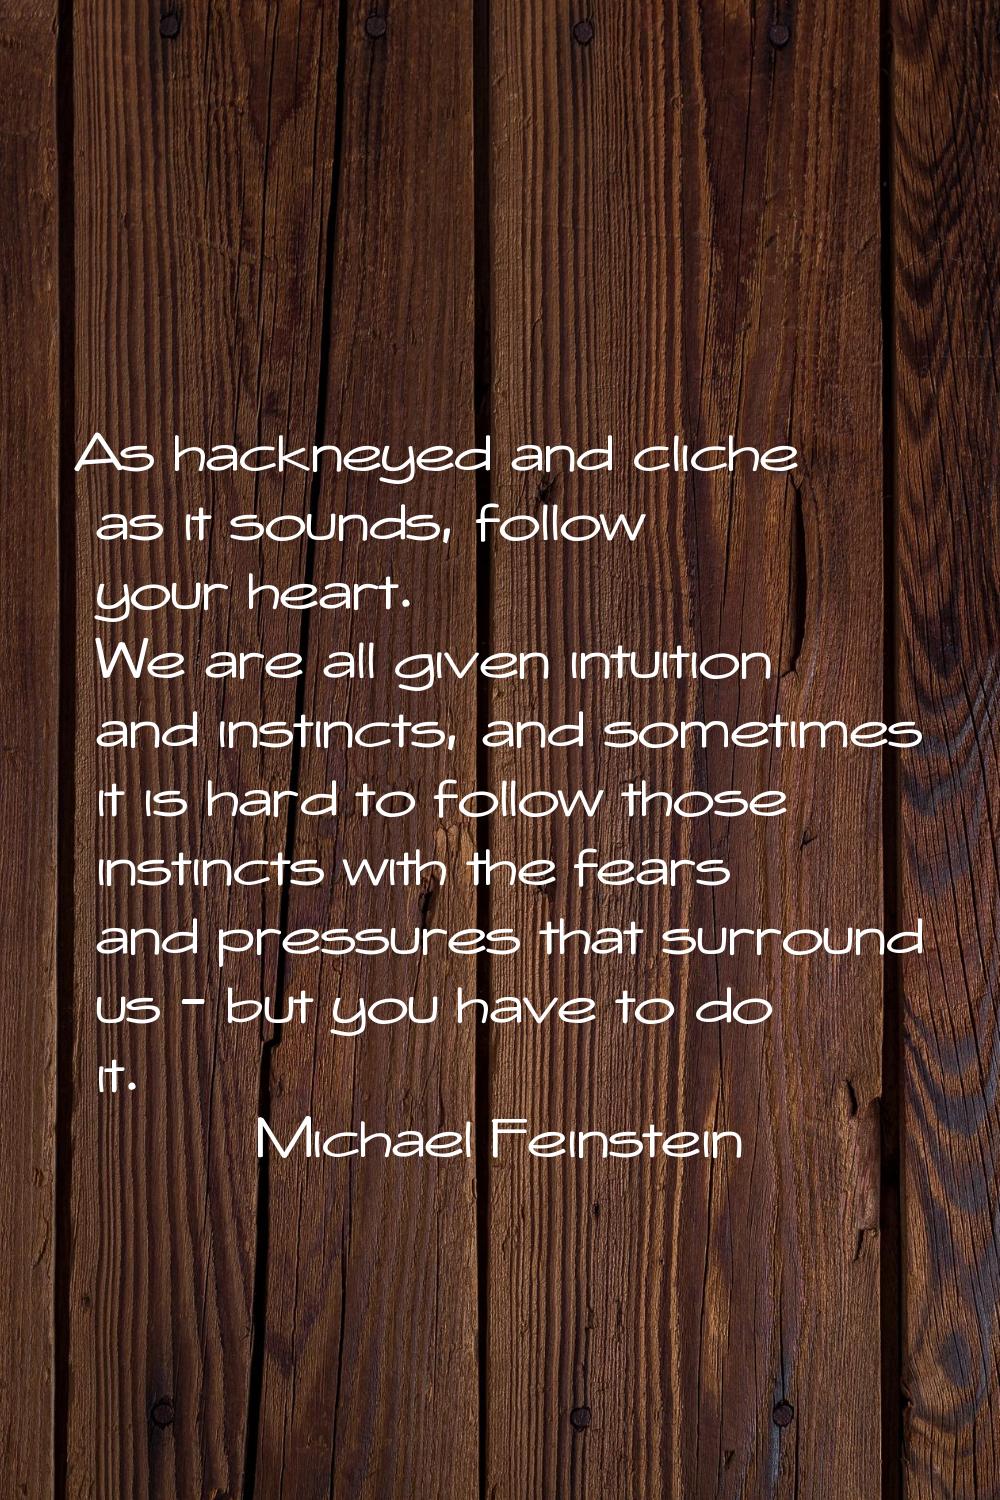 As hackneyed and cliche as it sounds, follow your heart. We are all given intuition and instincts, 